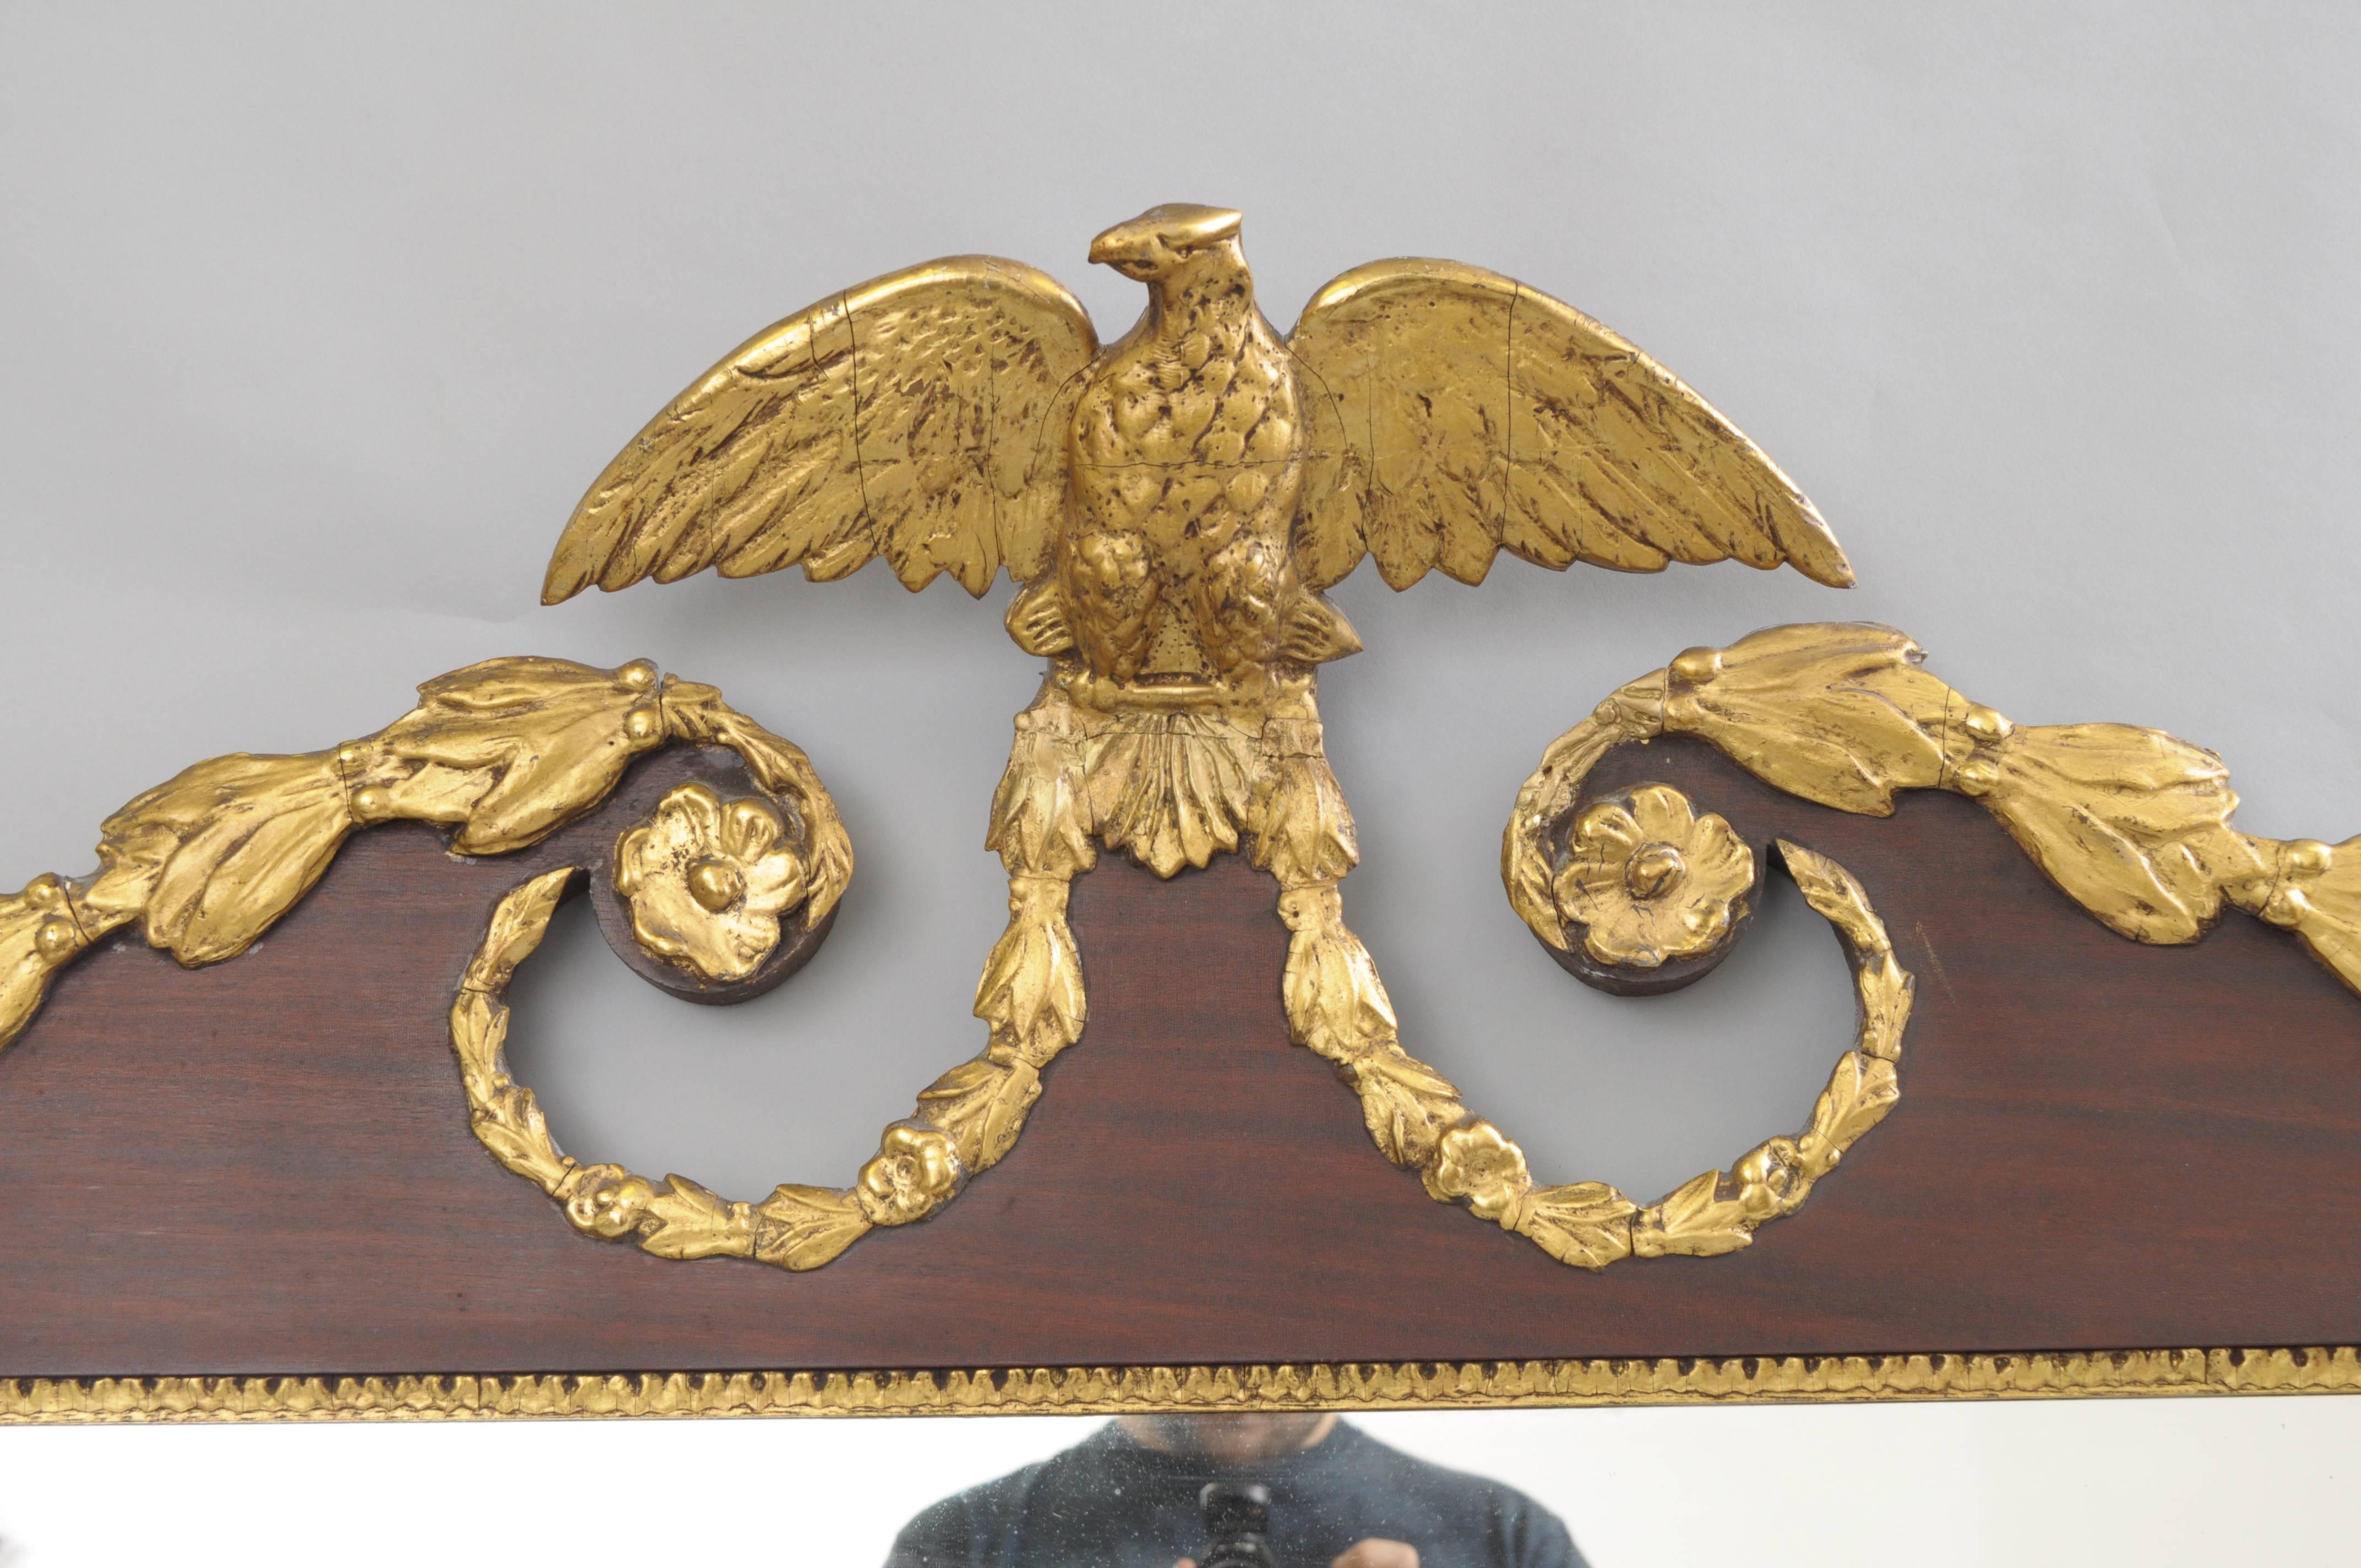 A horizontally oriented three-panel mahogany overmantel mirror with scrolling pediment centred with a mounted eagle finial with open wings and accented with a gold giltwood and gesso floral swag border with rosettes at the corners and pediment.